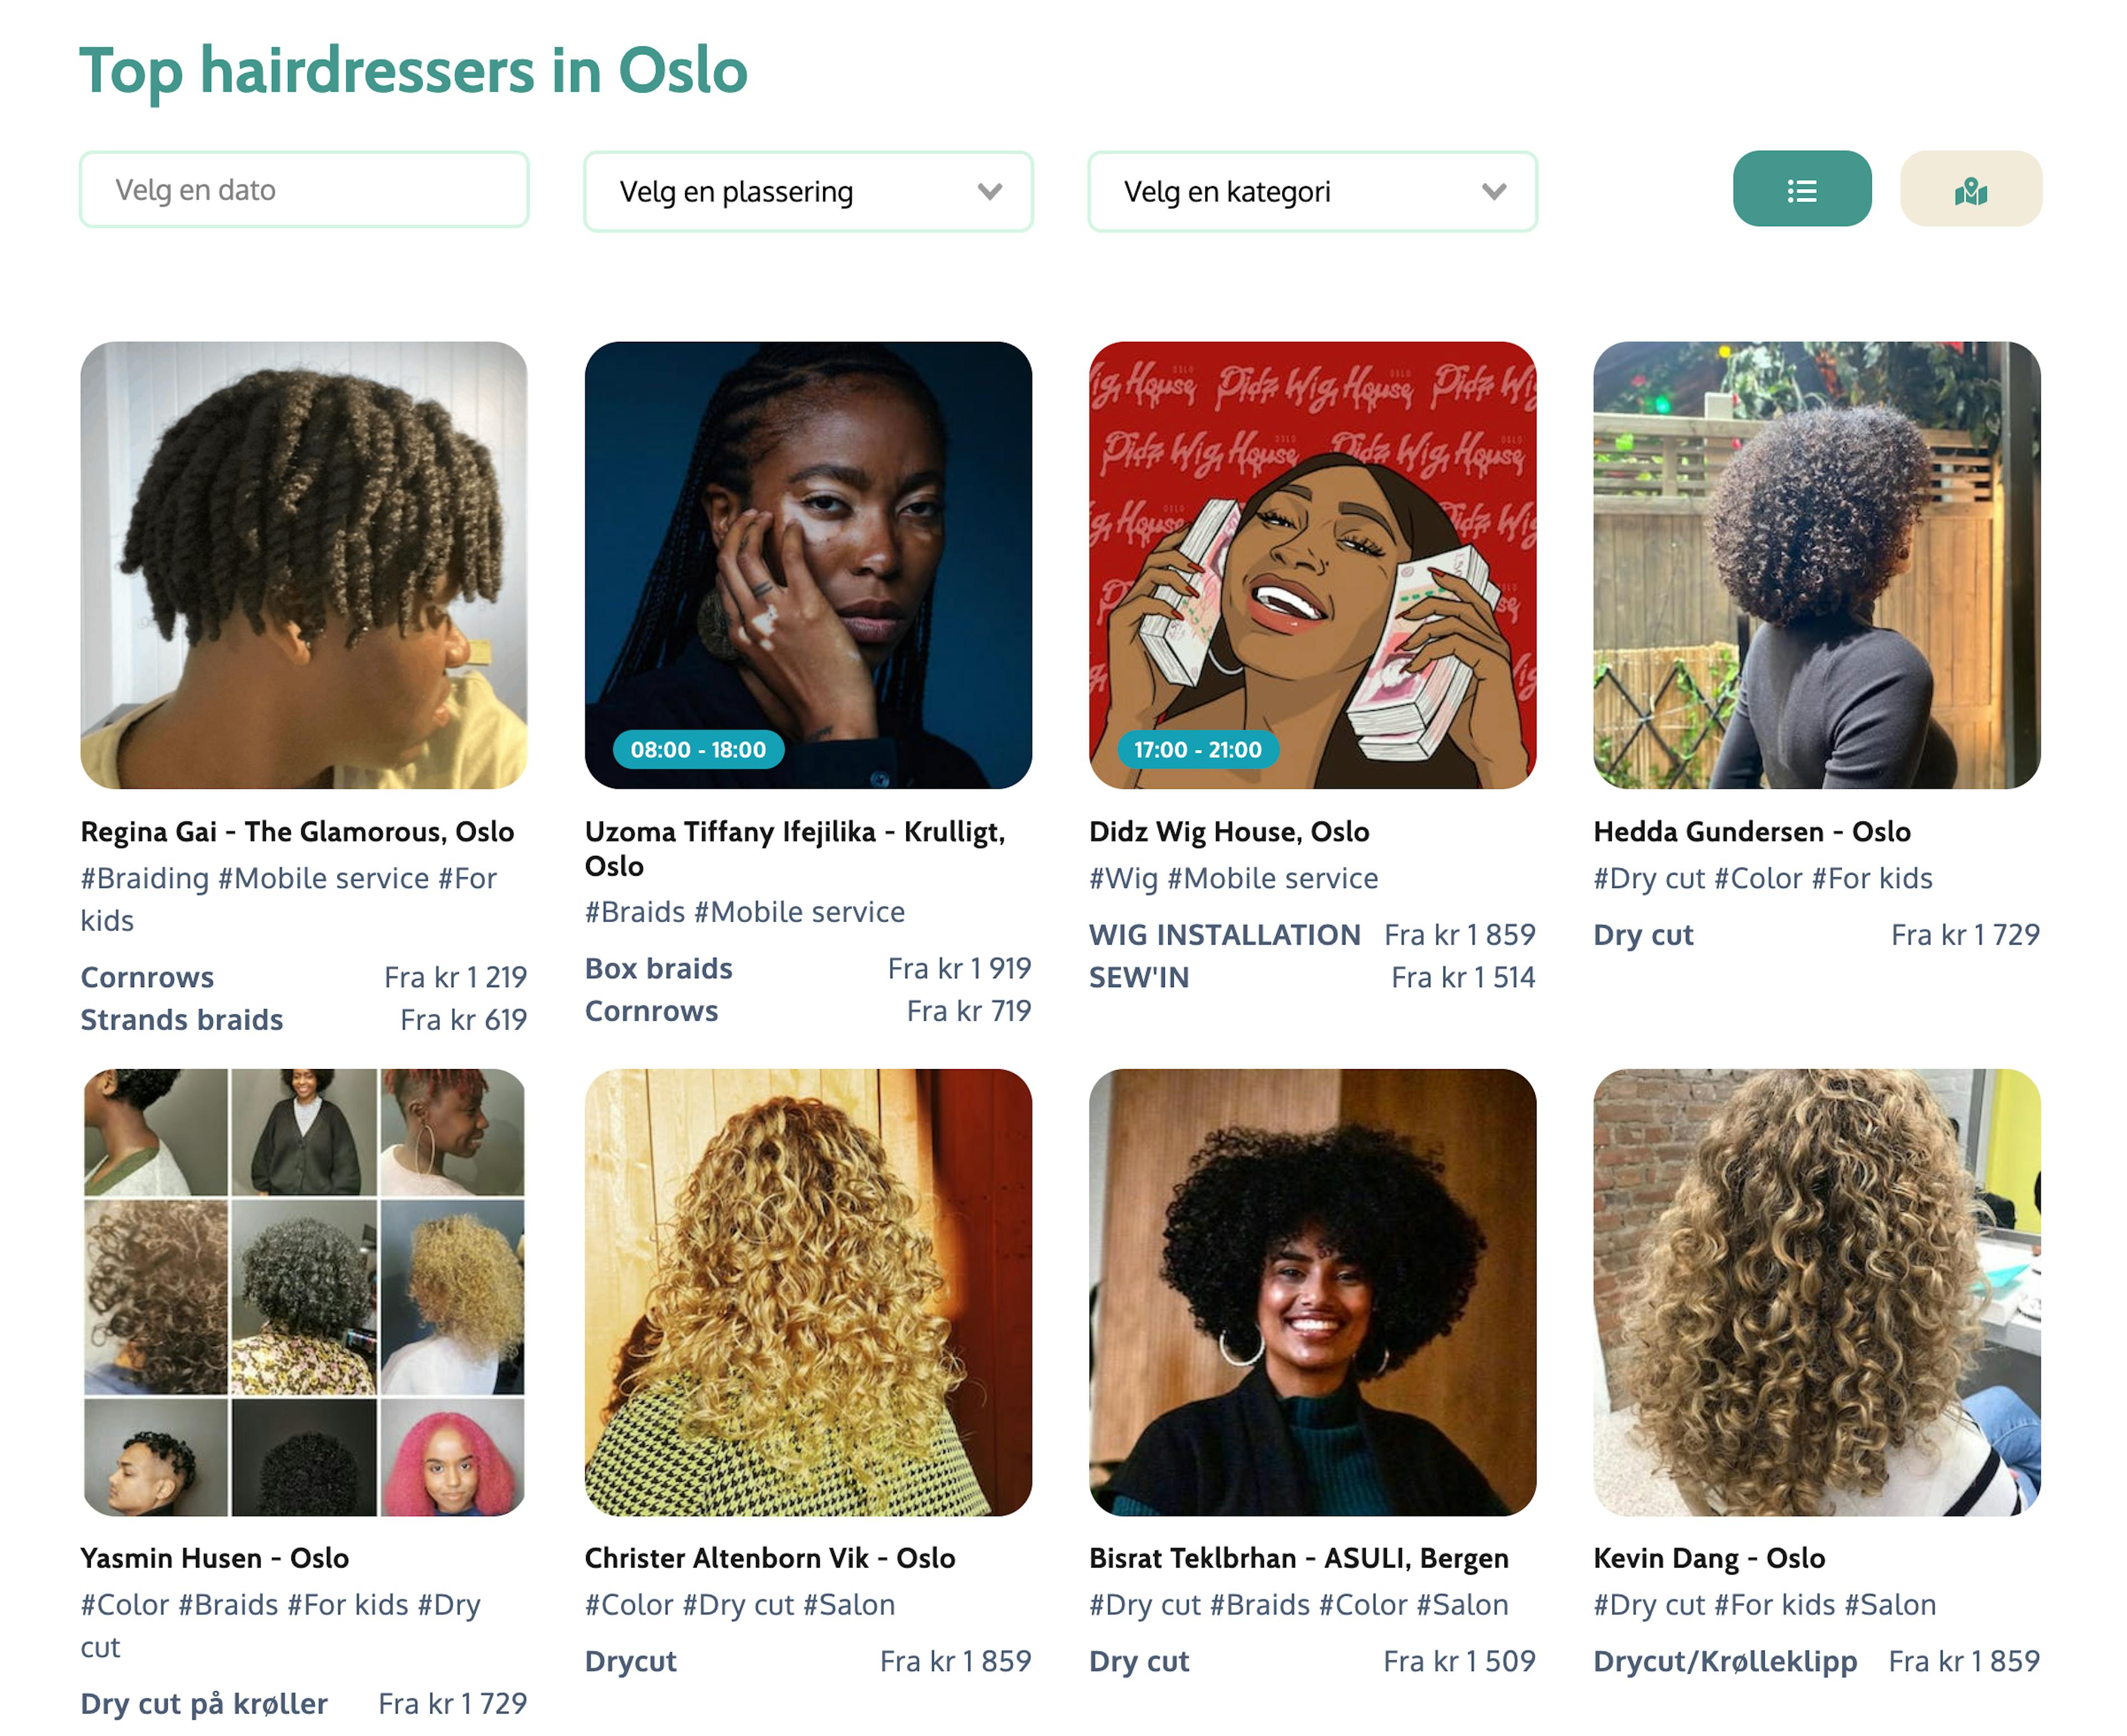 Listing example in Norwegian hairdresser marketplace https://www.thedaba.com/